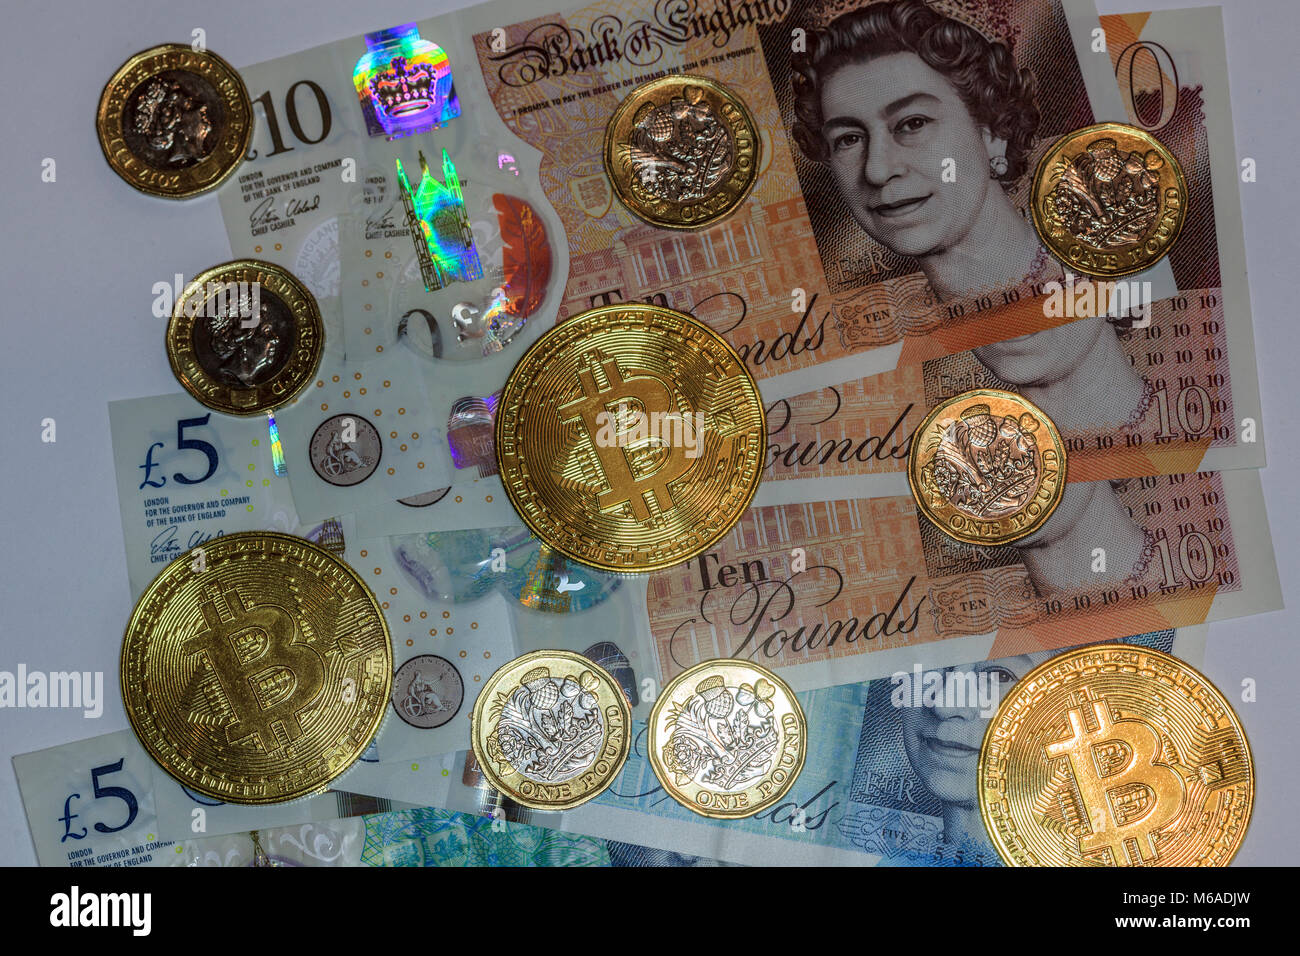 UK money, coins and banknotes Stock Photo